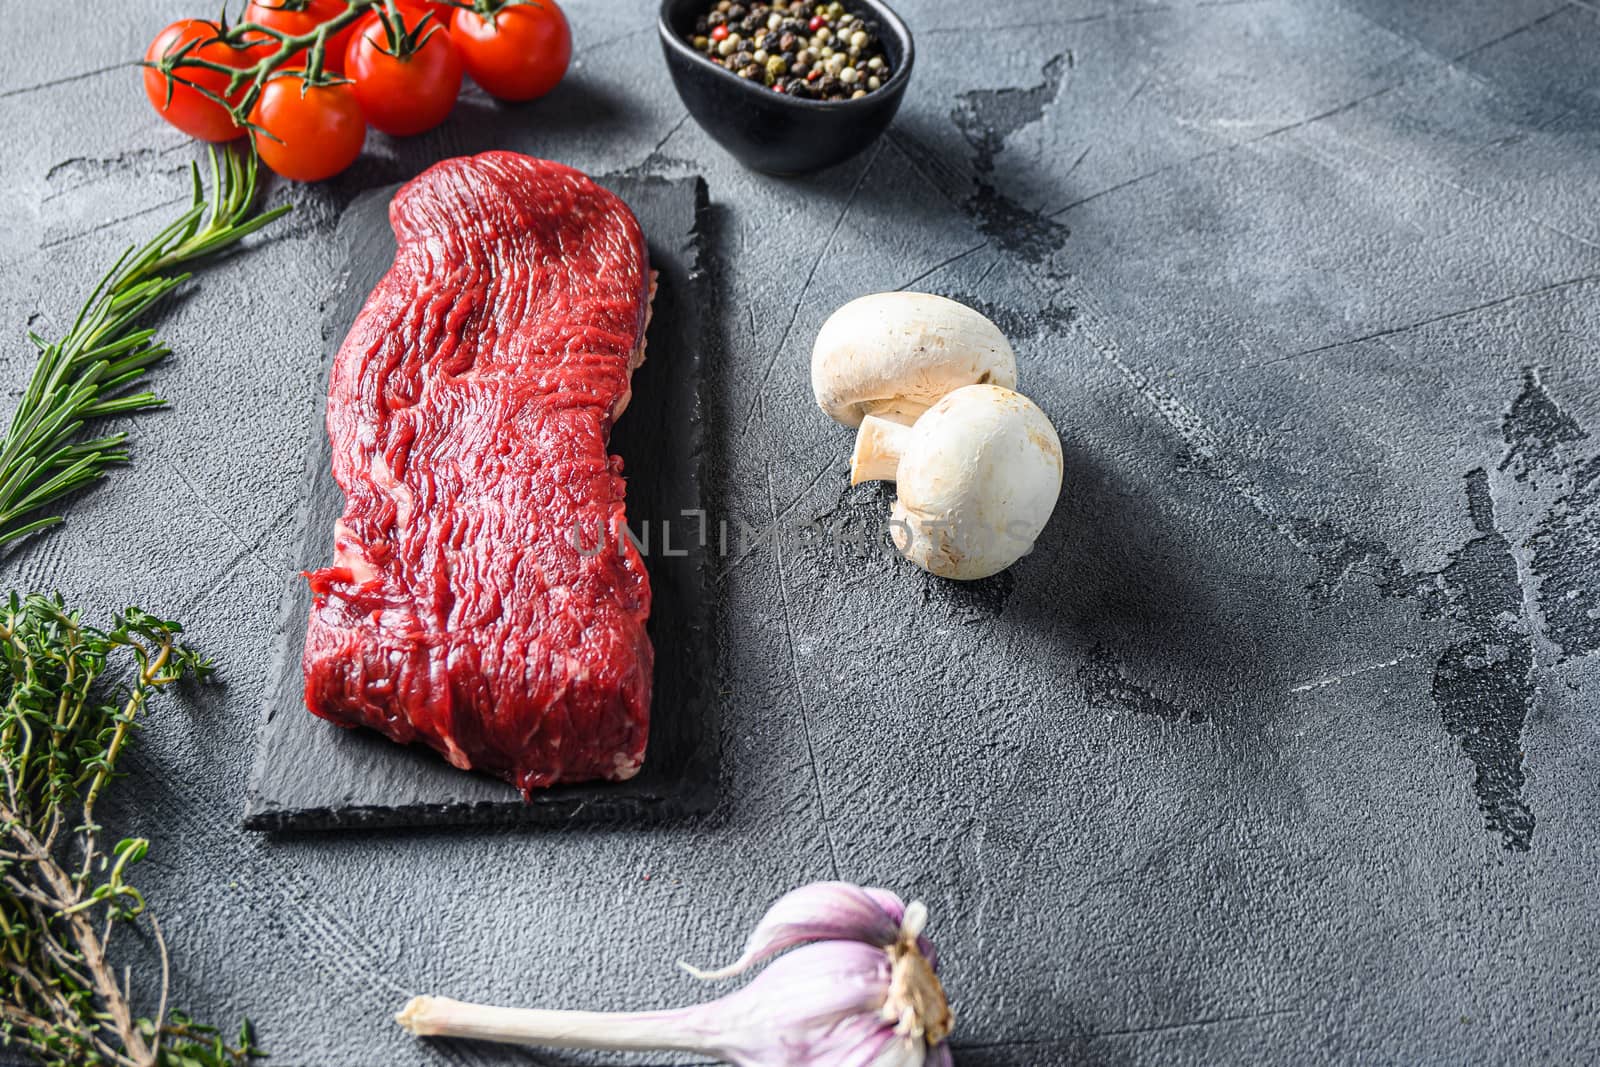 Organic Tri-tip, triangle roast marbled beef on black plate , marbled beef with herbs tomatoes peppercorns over grey stone surface background side view space for text new wide angle by Ilianesolenyi